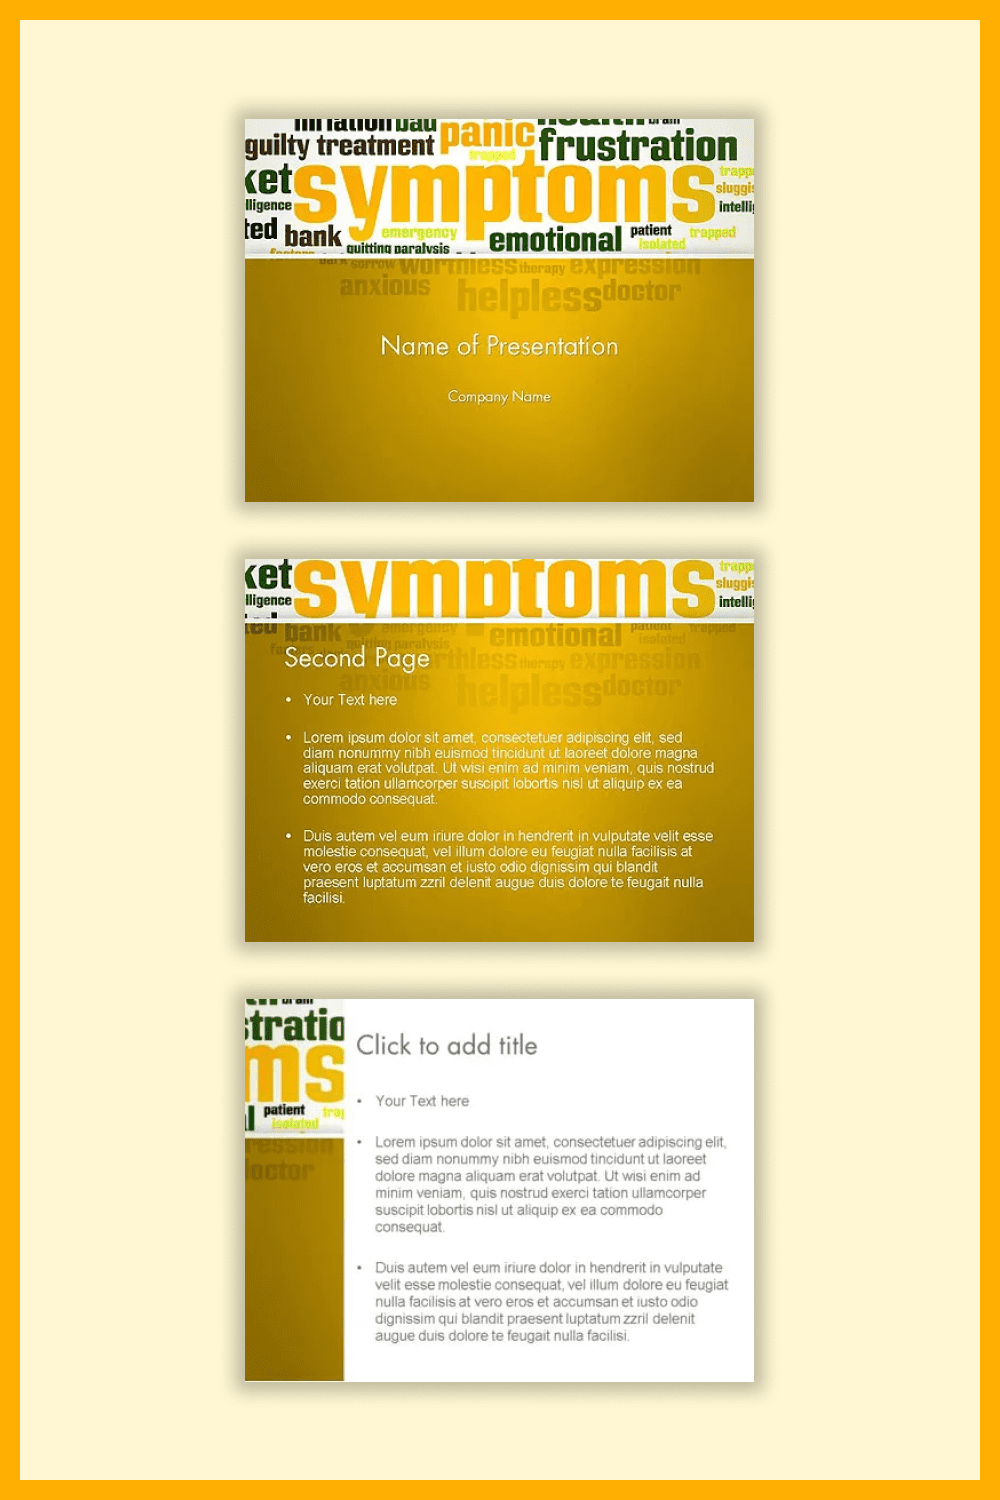 Collage of presentation pages with yellow background and capital letters in the title.